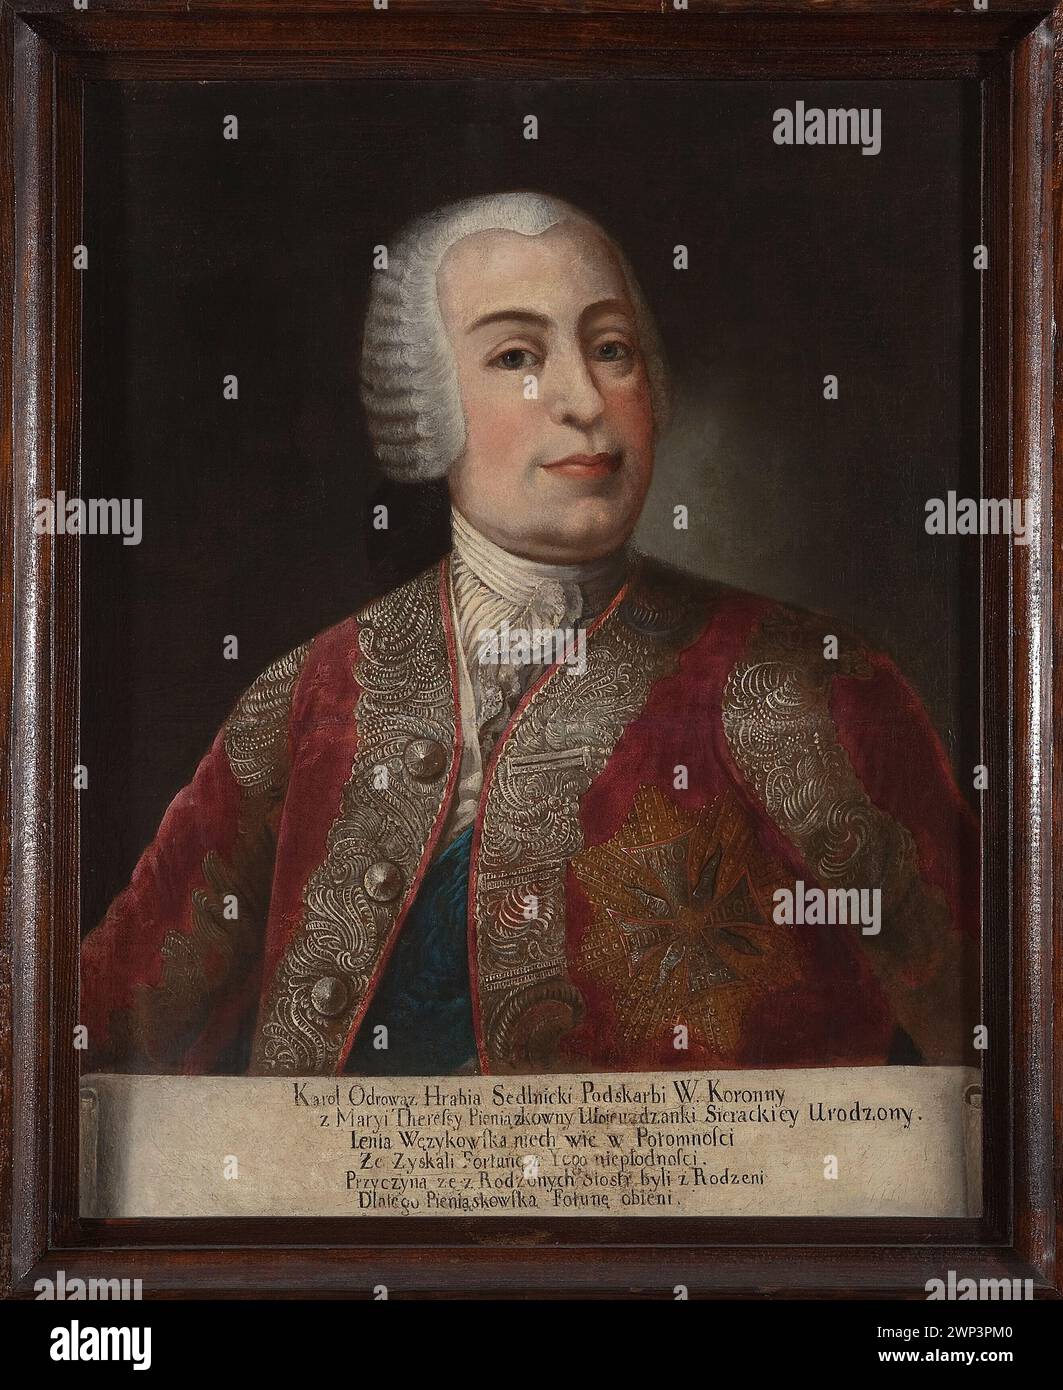 Portrait of Karol hr. Sedlnickiego (h. Odrow  (1703-1761), a great crown tube;  around 1781 (1781-00-00-1790-00-00); the Muse of the National Museum in Warsaw was taken from the Muse of the Muse of the Muse of the Muse; ; products from Wąkien / Fabric / Law; MP 2960 MNW; all rights are reserved.Odrowąż (coat of arms), Order of the White Eagle, Szwarc, Szymon (1884-1959) - collection, gift (provenance), tailcoats, order stars, wigs, male portraits, portraits with inscription, Żaboty Stock Photo